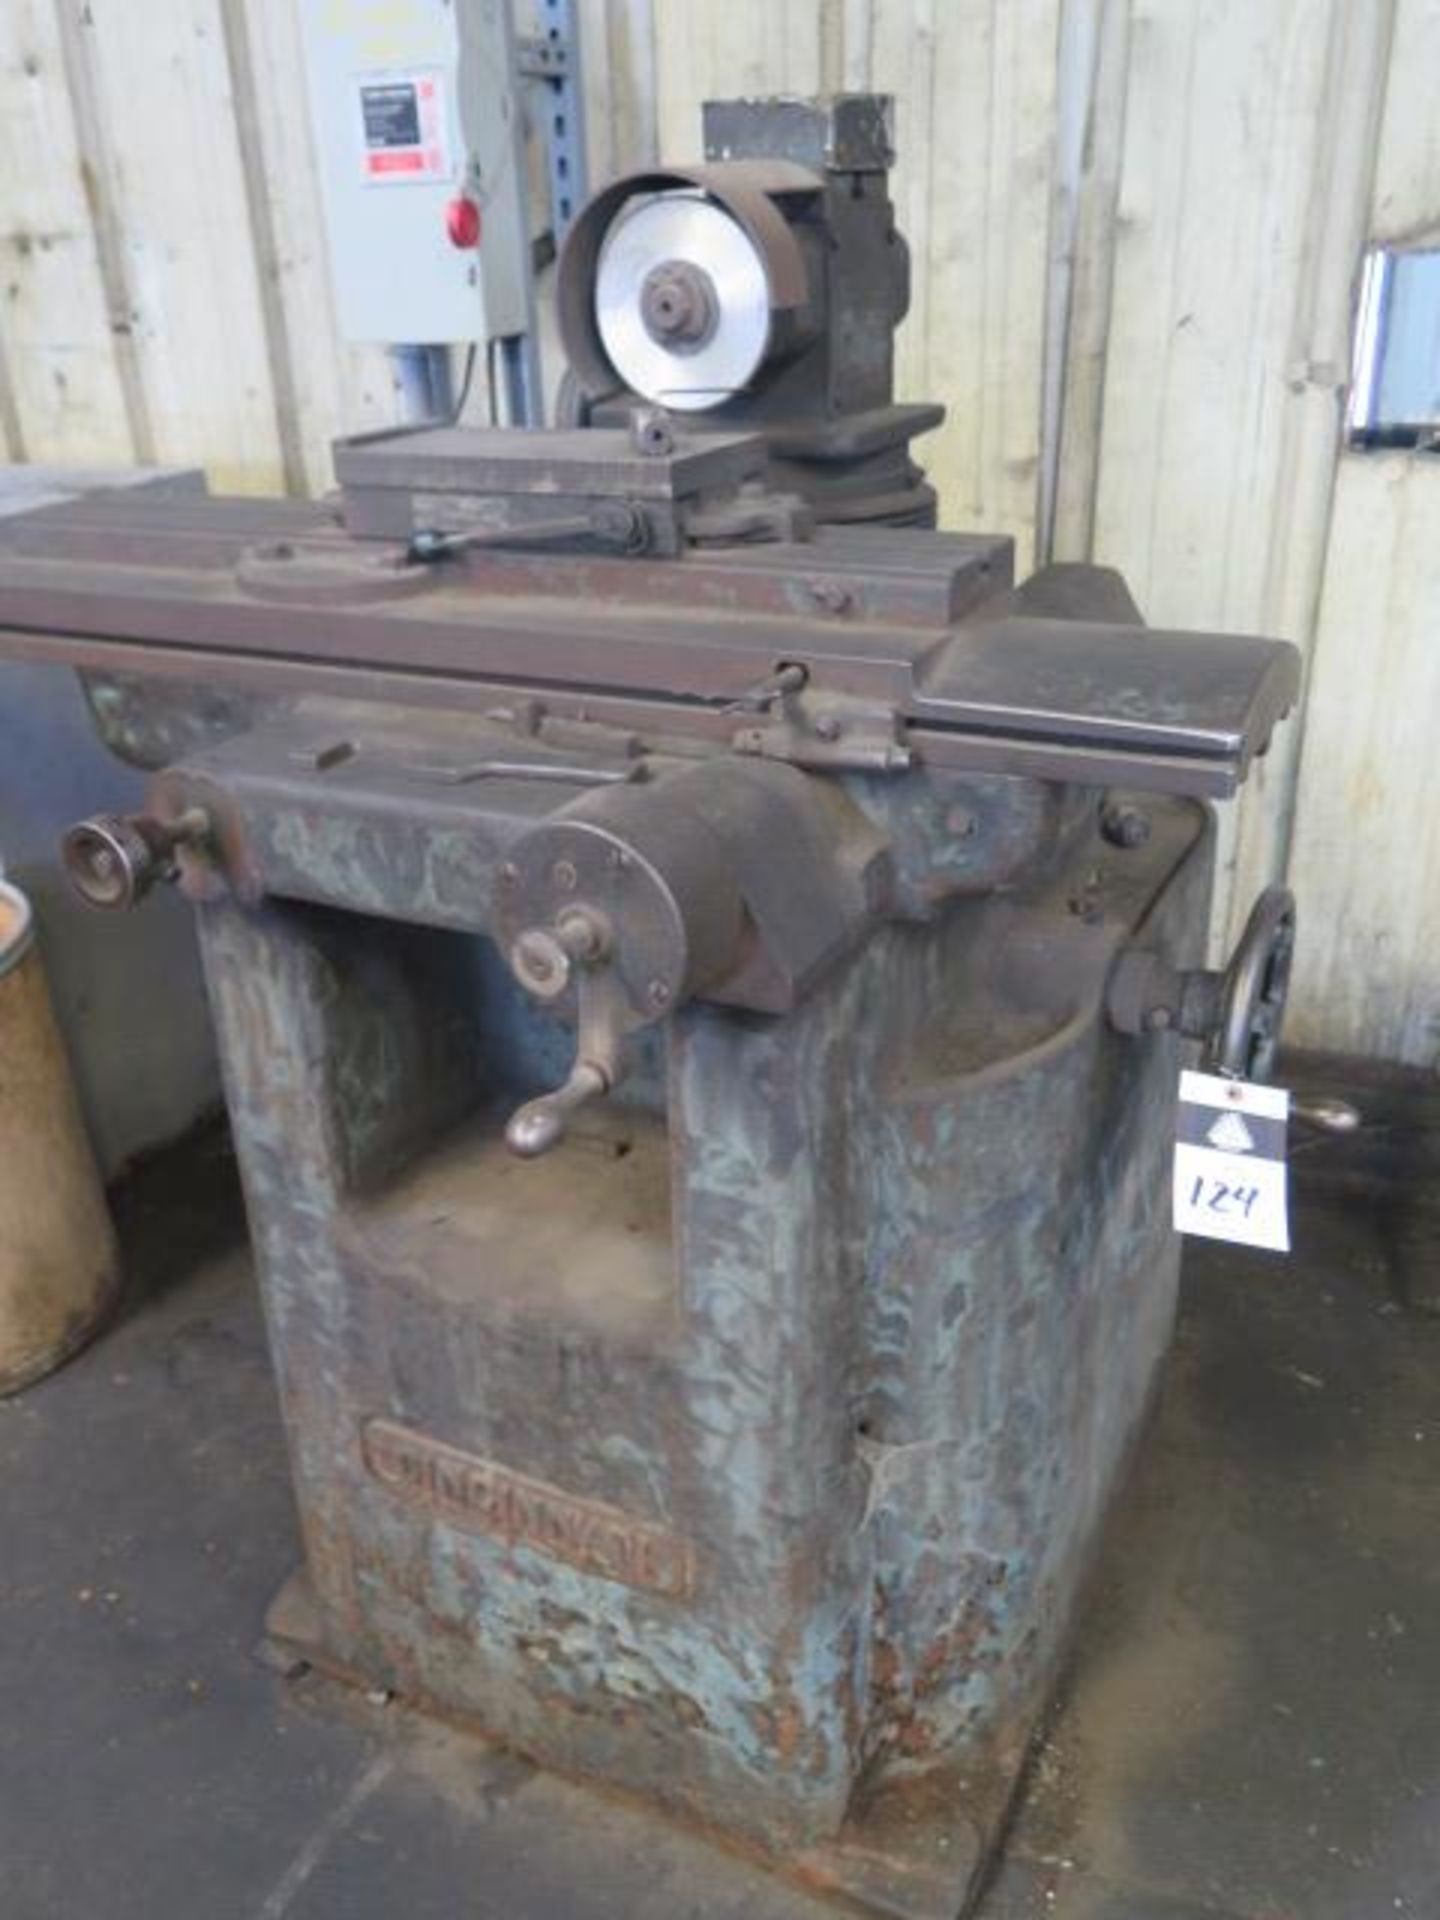 Cincinnati Tool and Cutter Grinder w/ Compound Grinding Head, 6” x 12” Magnetic Chuck SOLD AS IS - Image 2 of 6